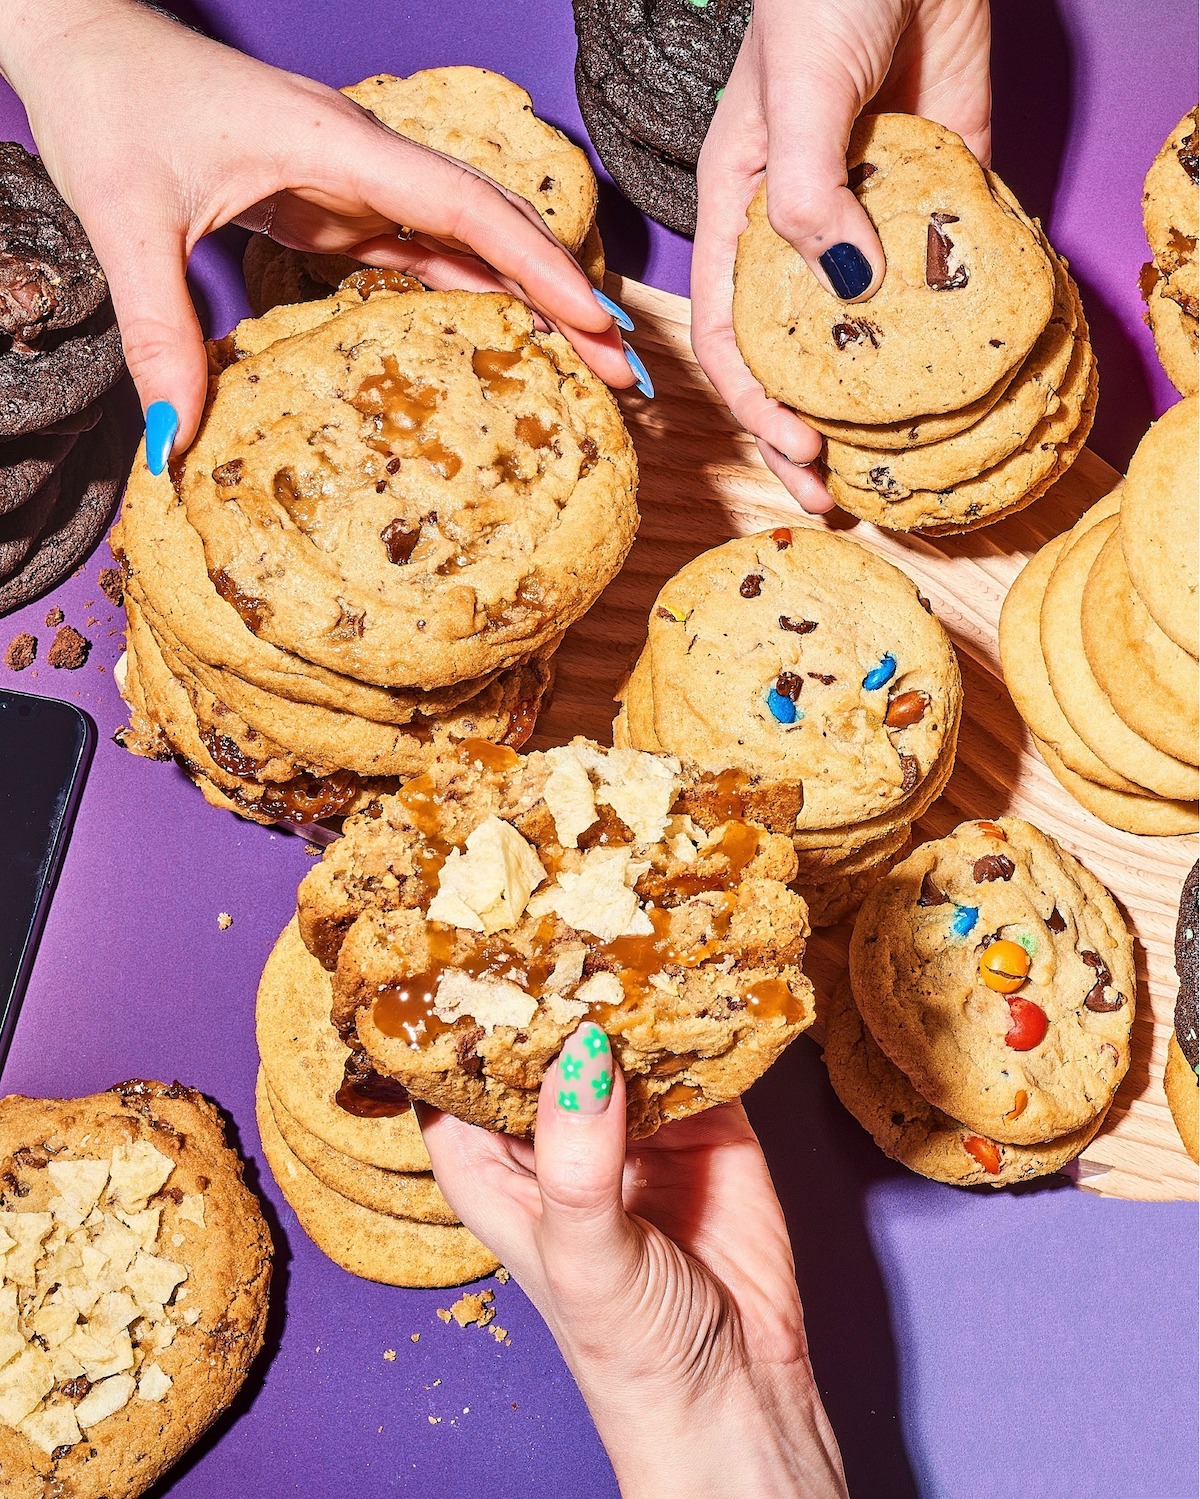 Widespread Cookie Franchise Insomnia Cookies is Planning to Open its First Berkeley Outpost